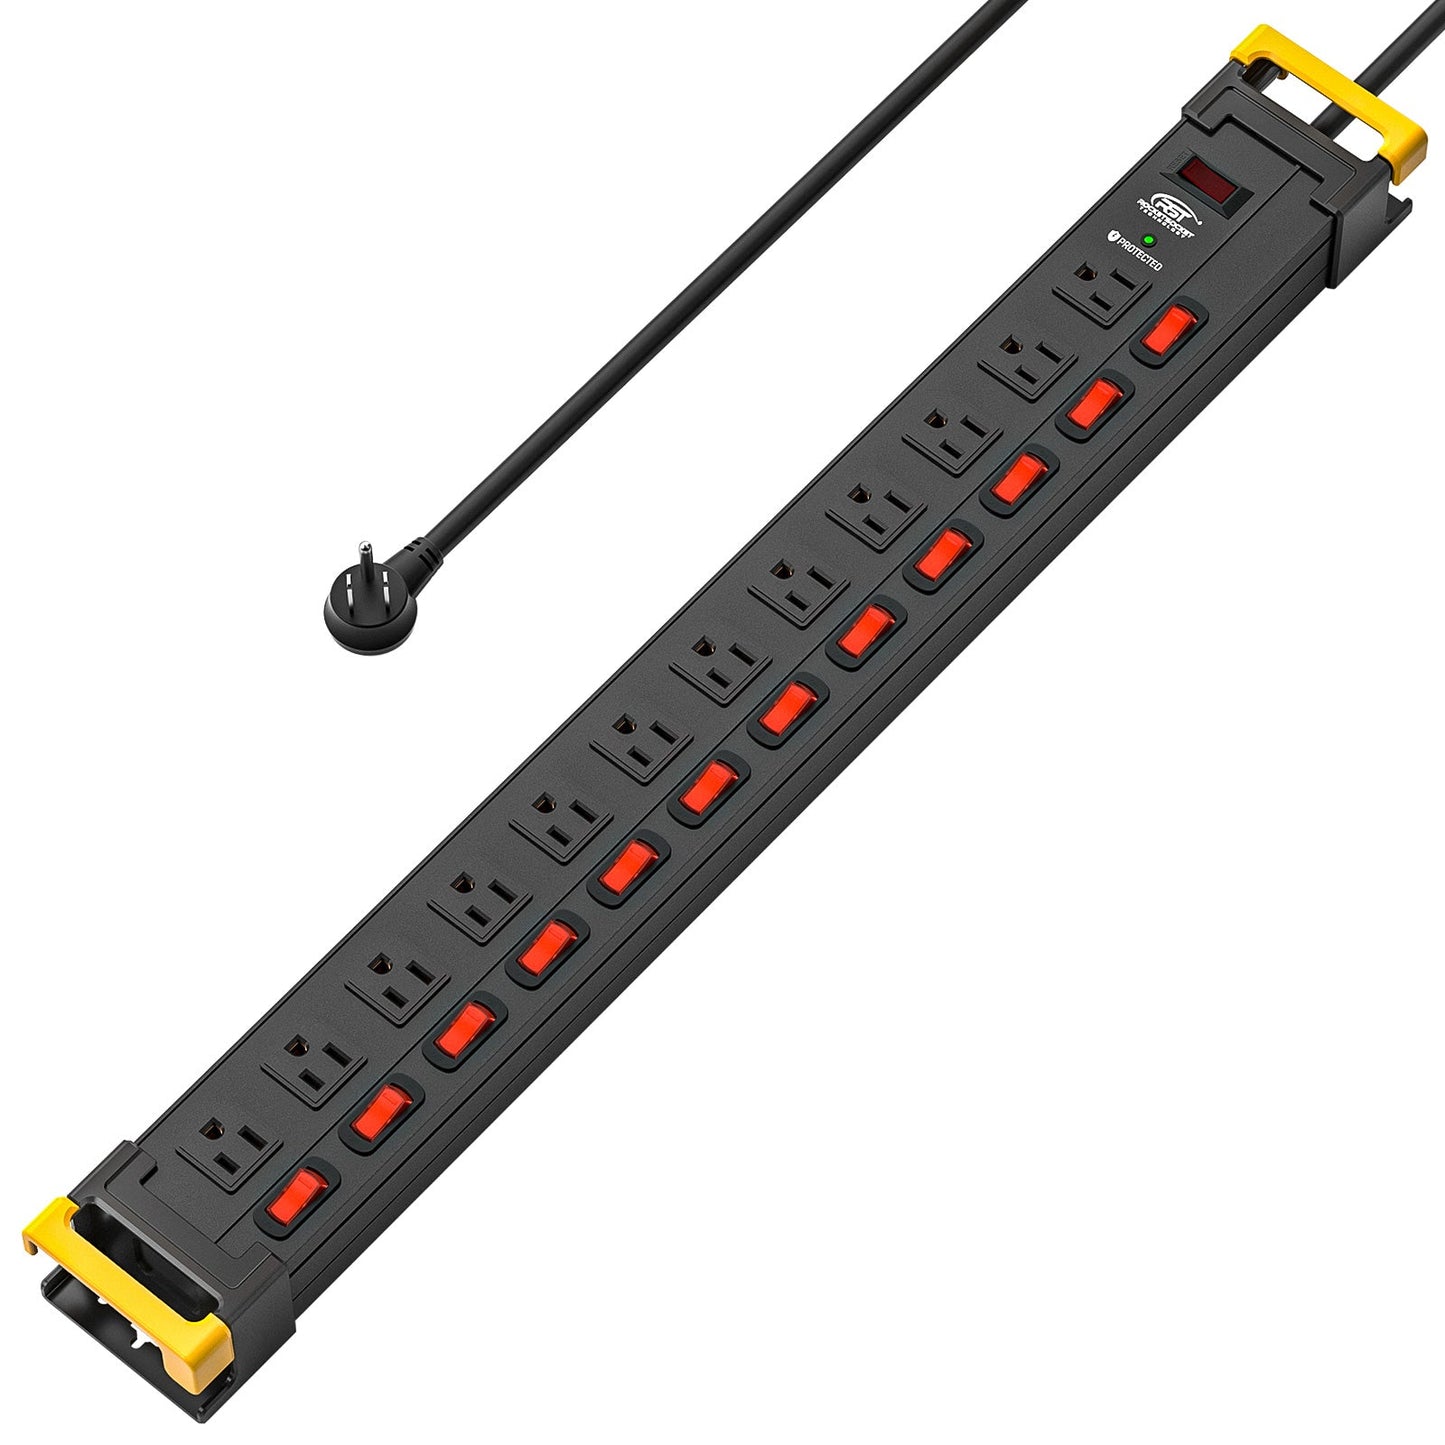 RocketSocket power strip Black CRST 12-Outlets 9 ft. Heavy Duty Surge Protector Power Strip 15A